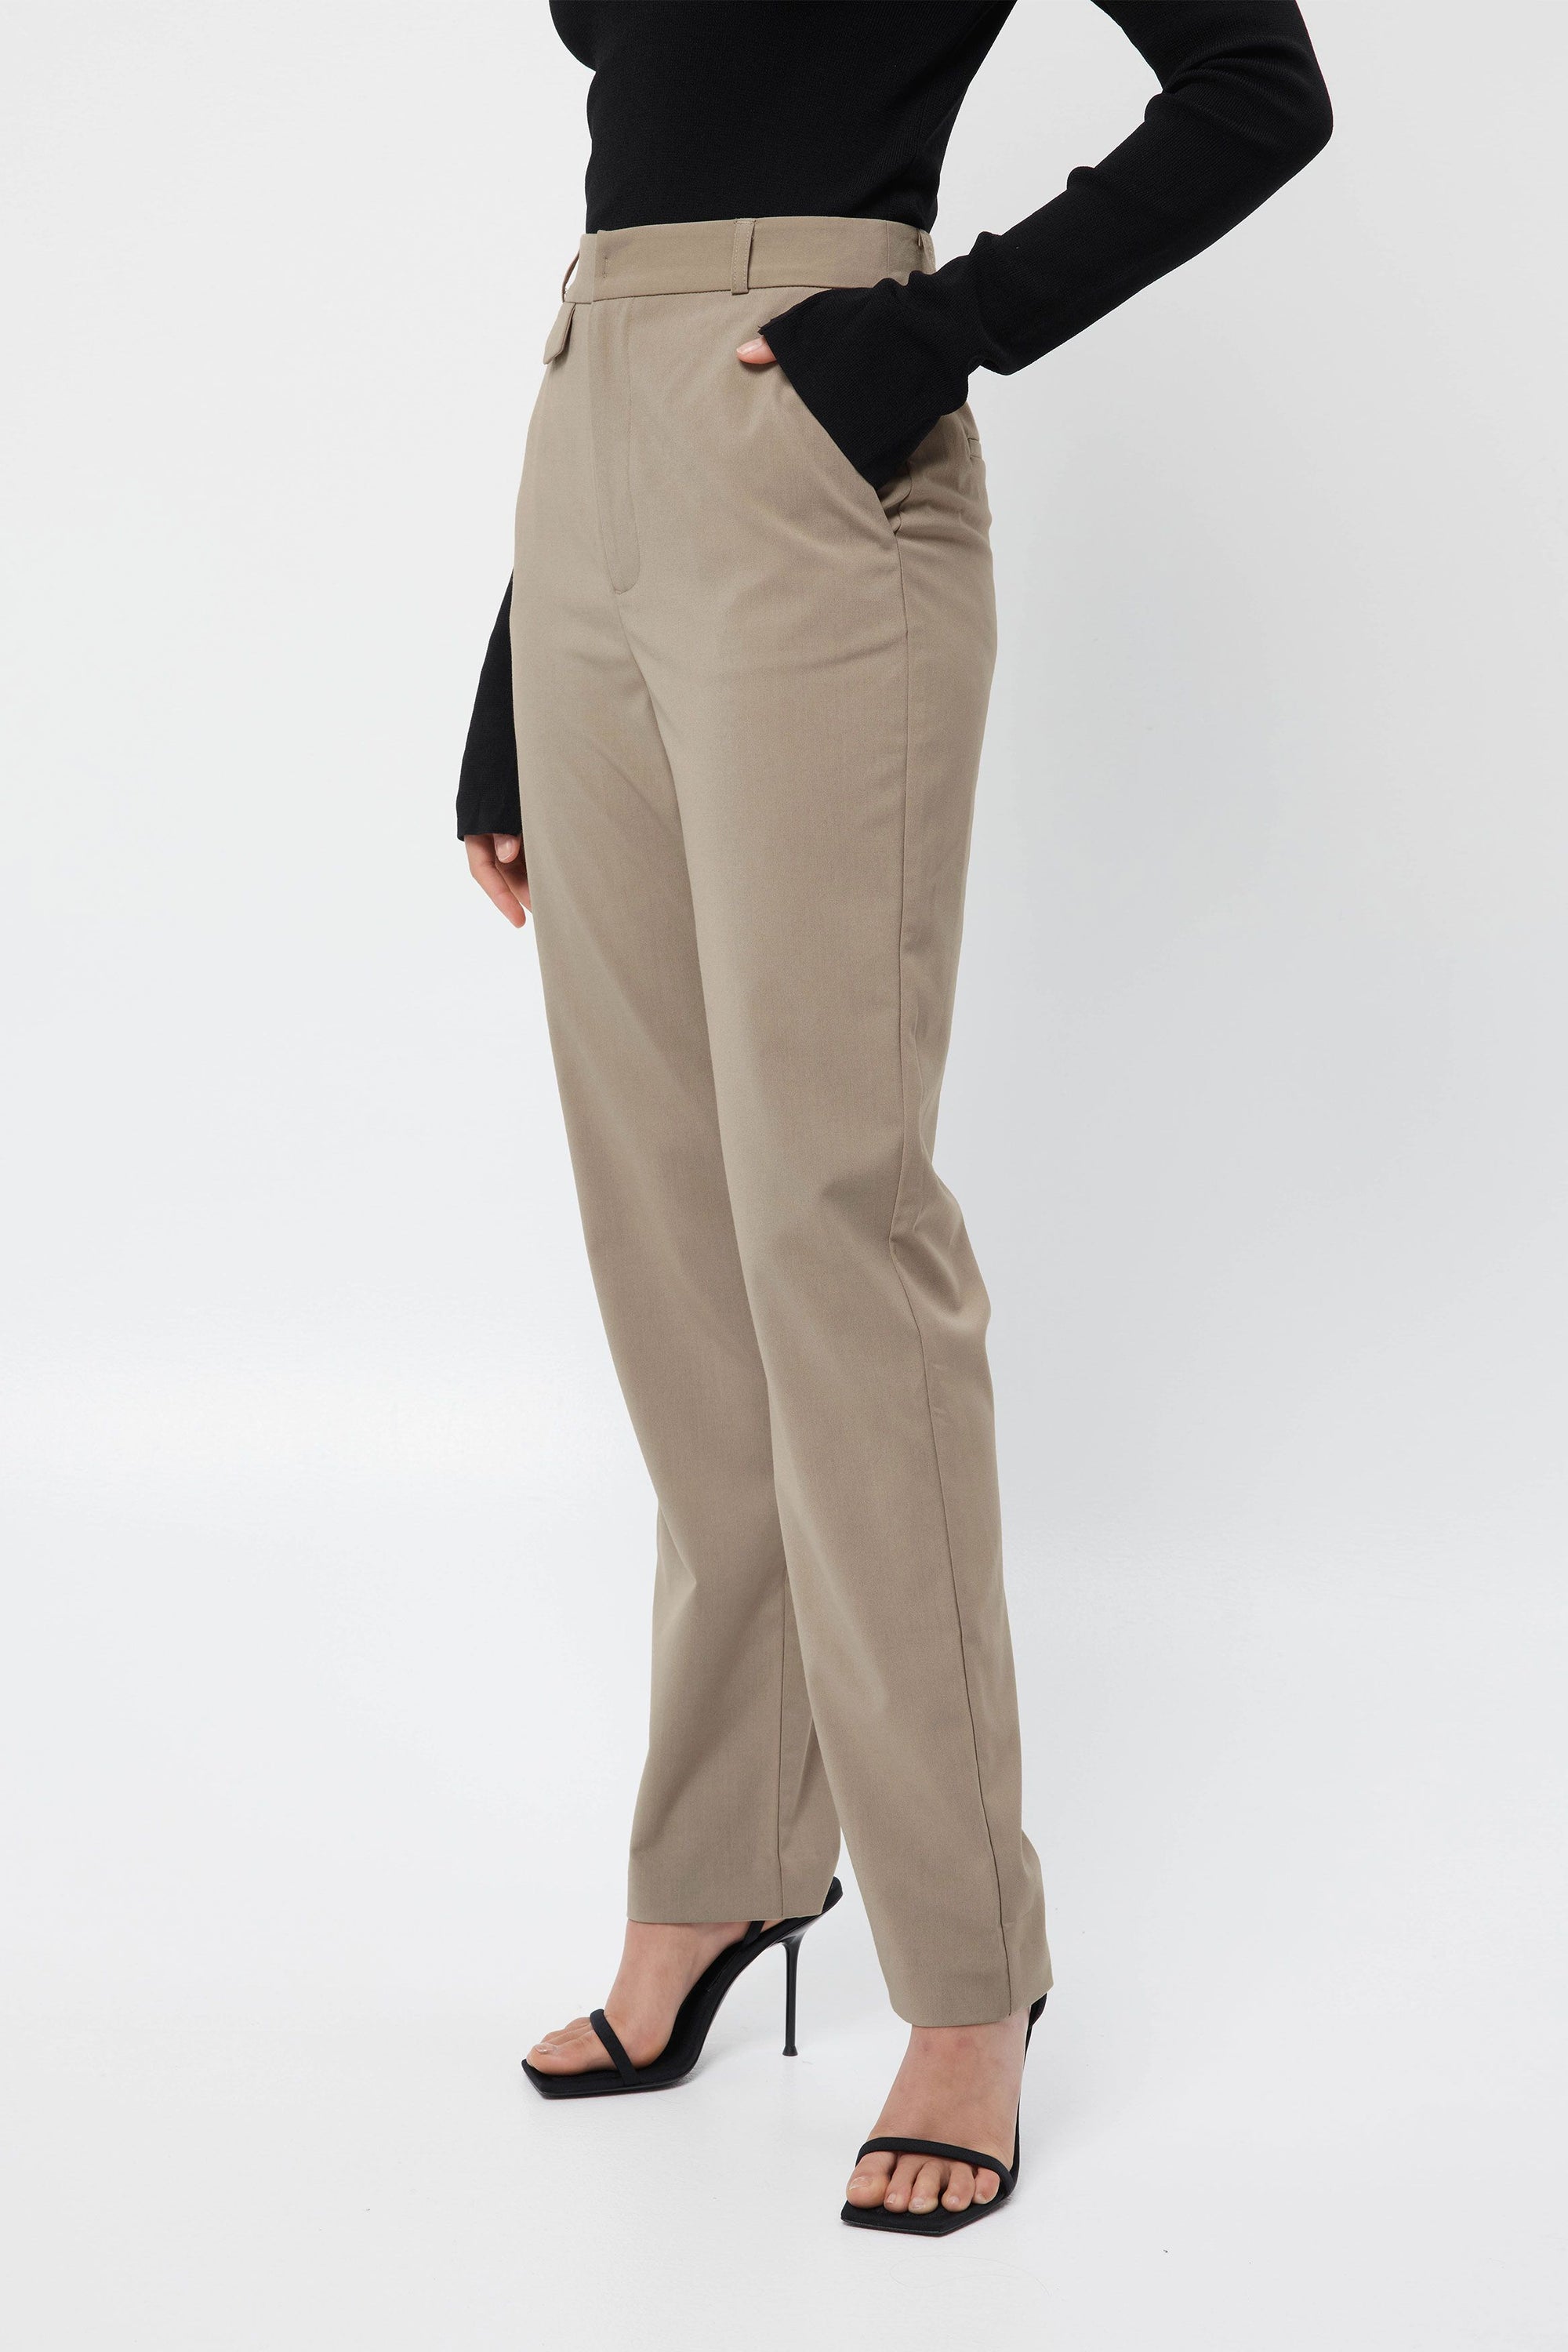 New Yorker Pant - Neutral